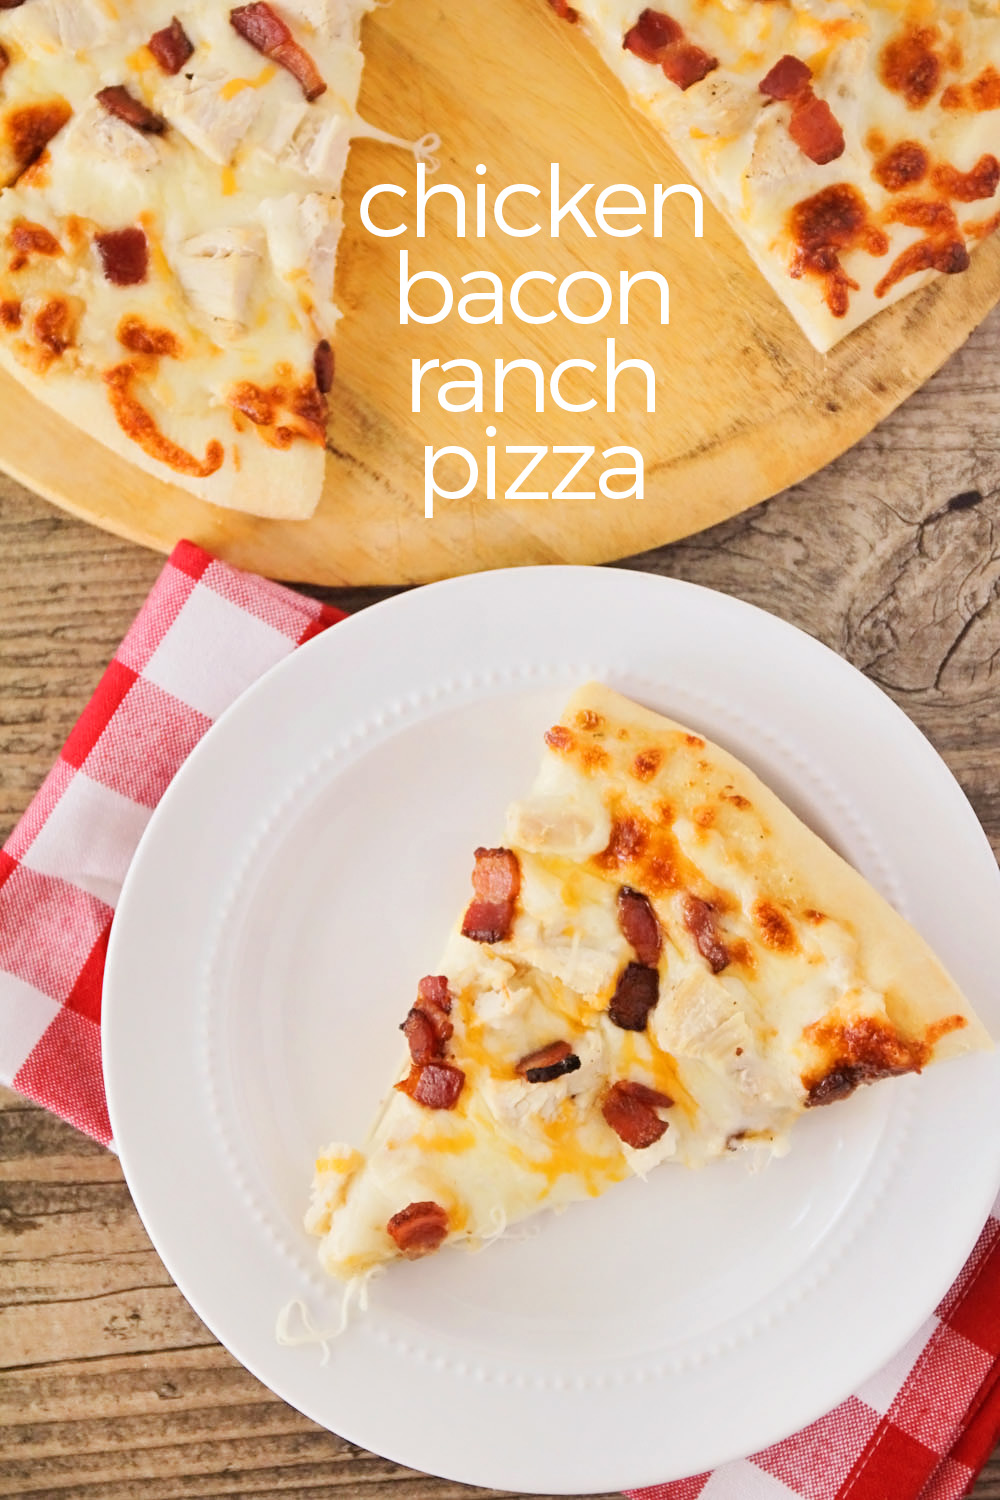 This chicken bacon ranch pizza is so cheesy and delicious, and easy to make too! Perfect for family pizza night!